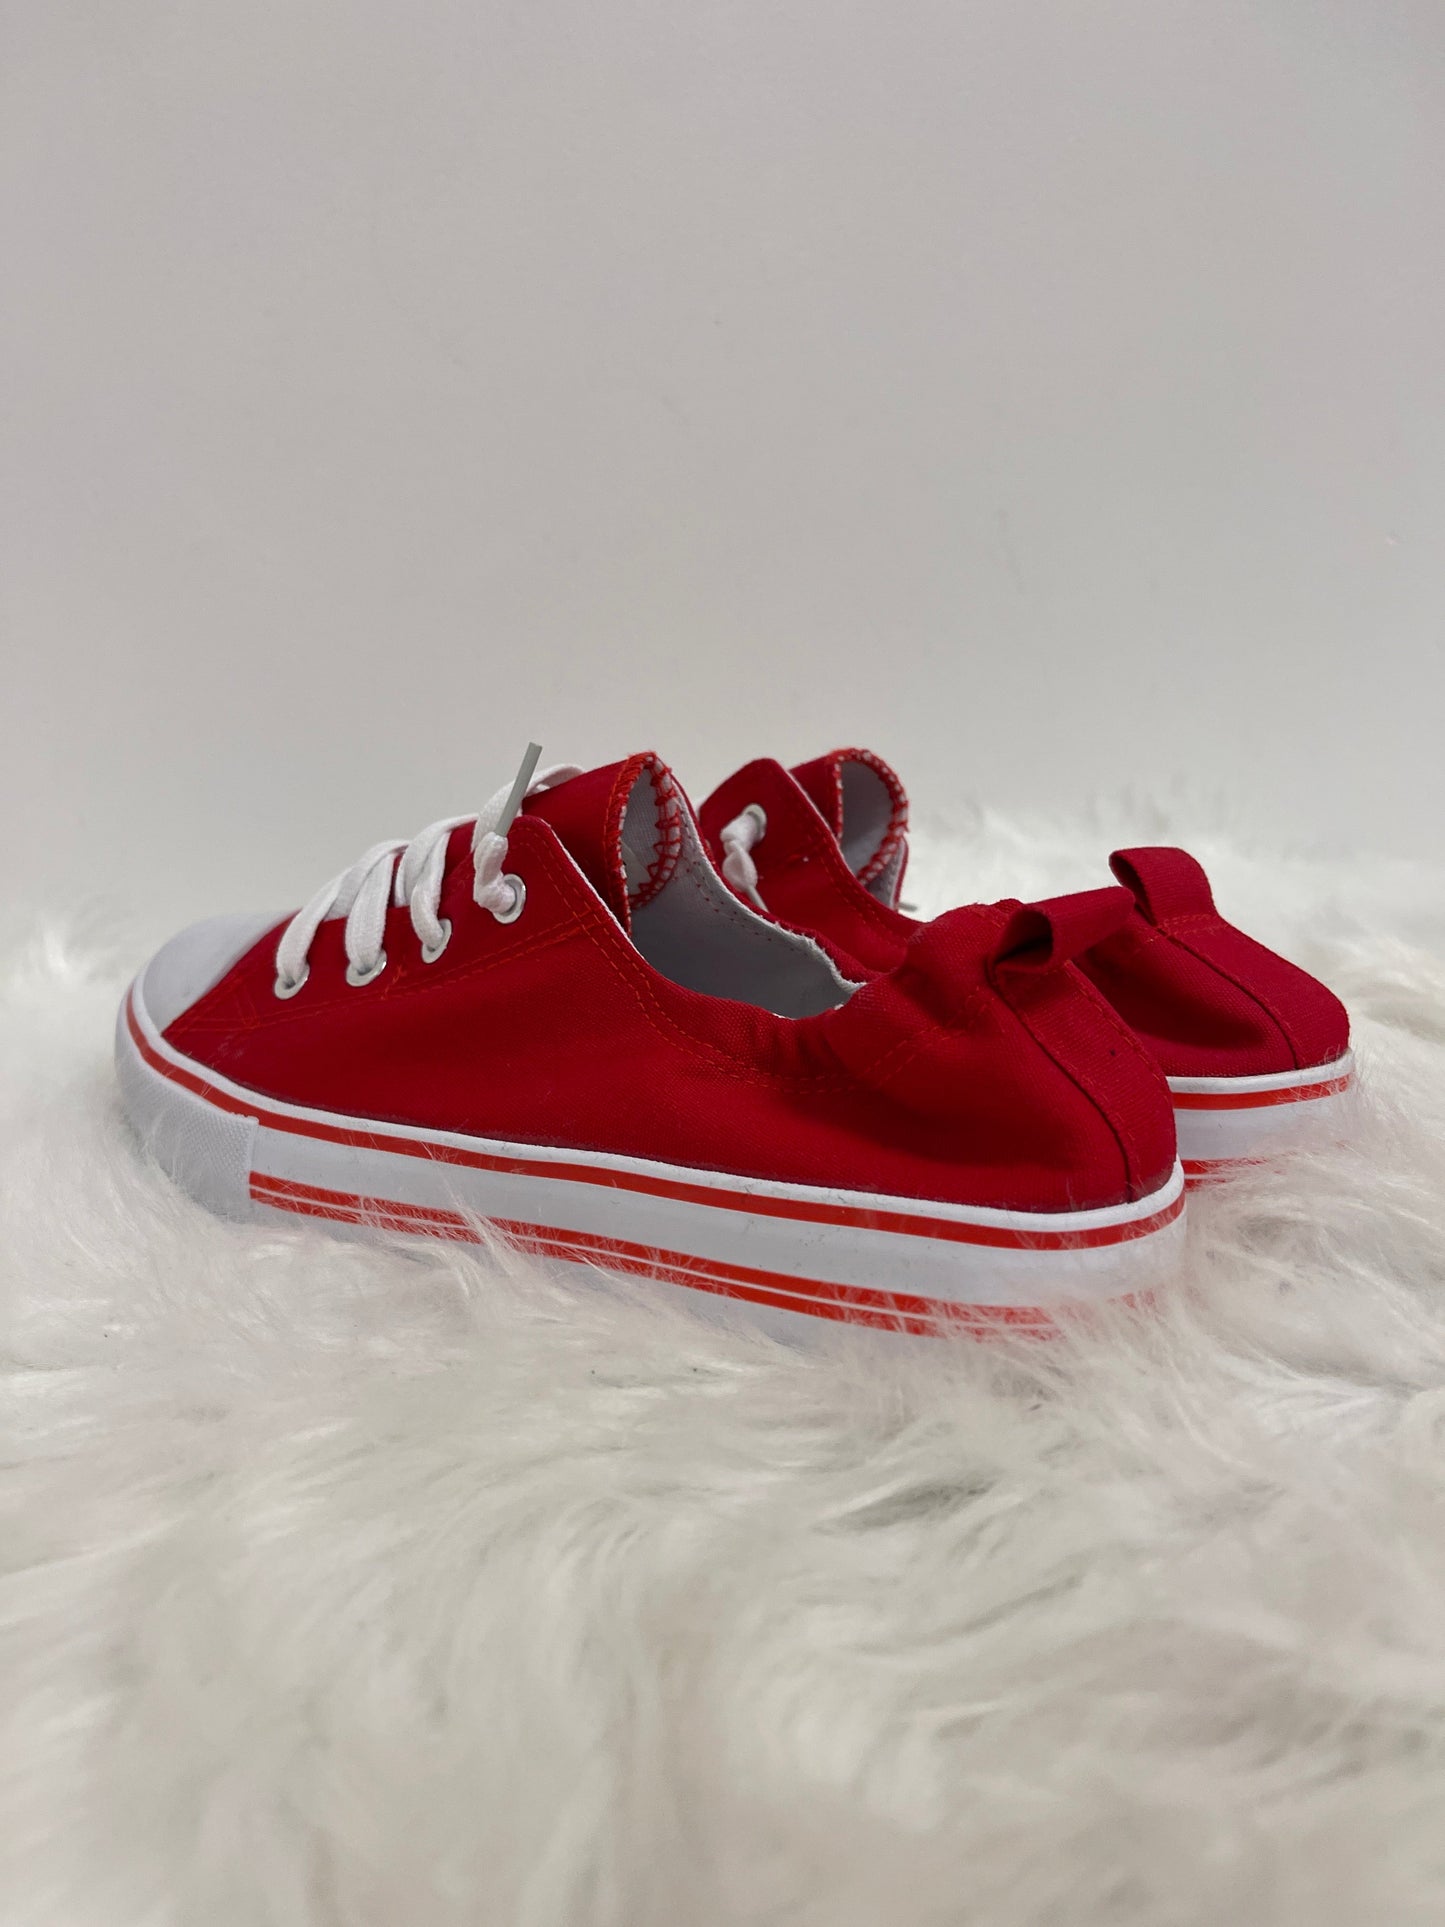 Red Shoes Sneakers Pierre Dumas, Size 8